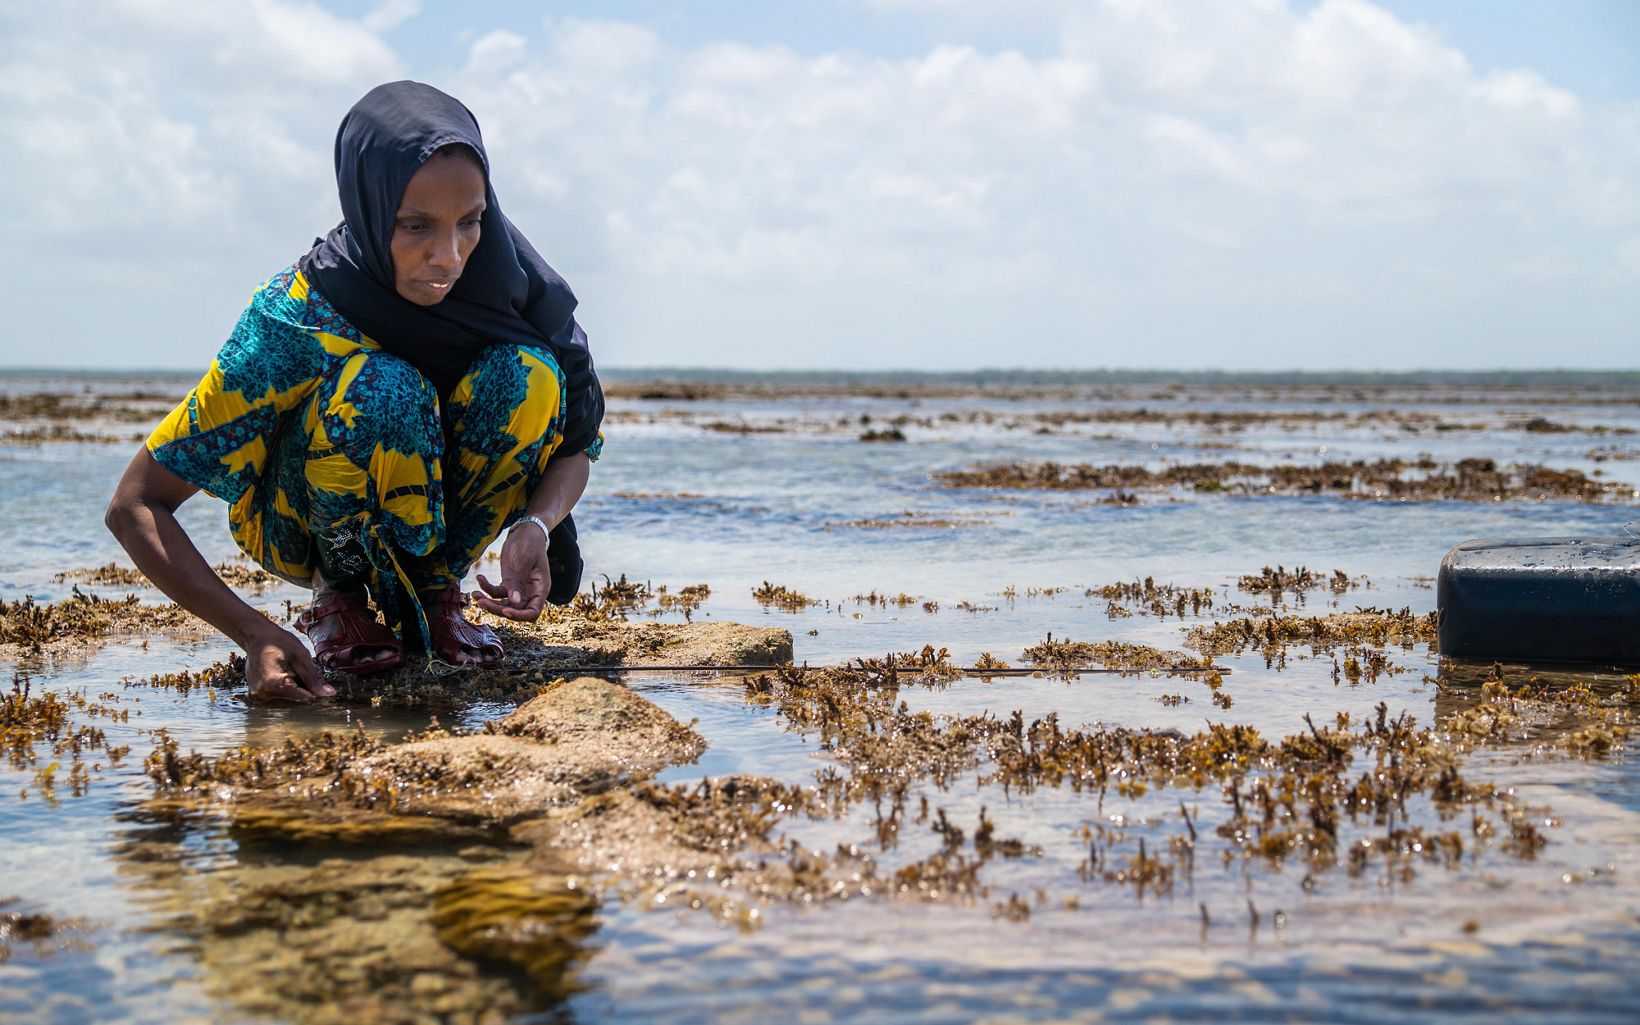 Amina Ahmed fishes for octopuses after the no-take zone is re-opened in Lamu, Kenya.